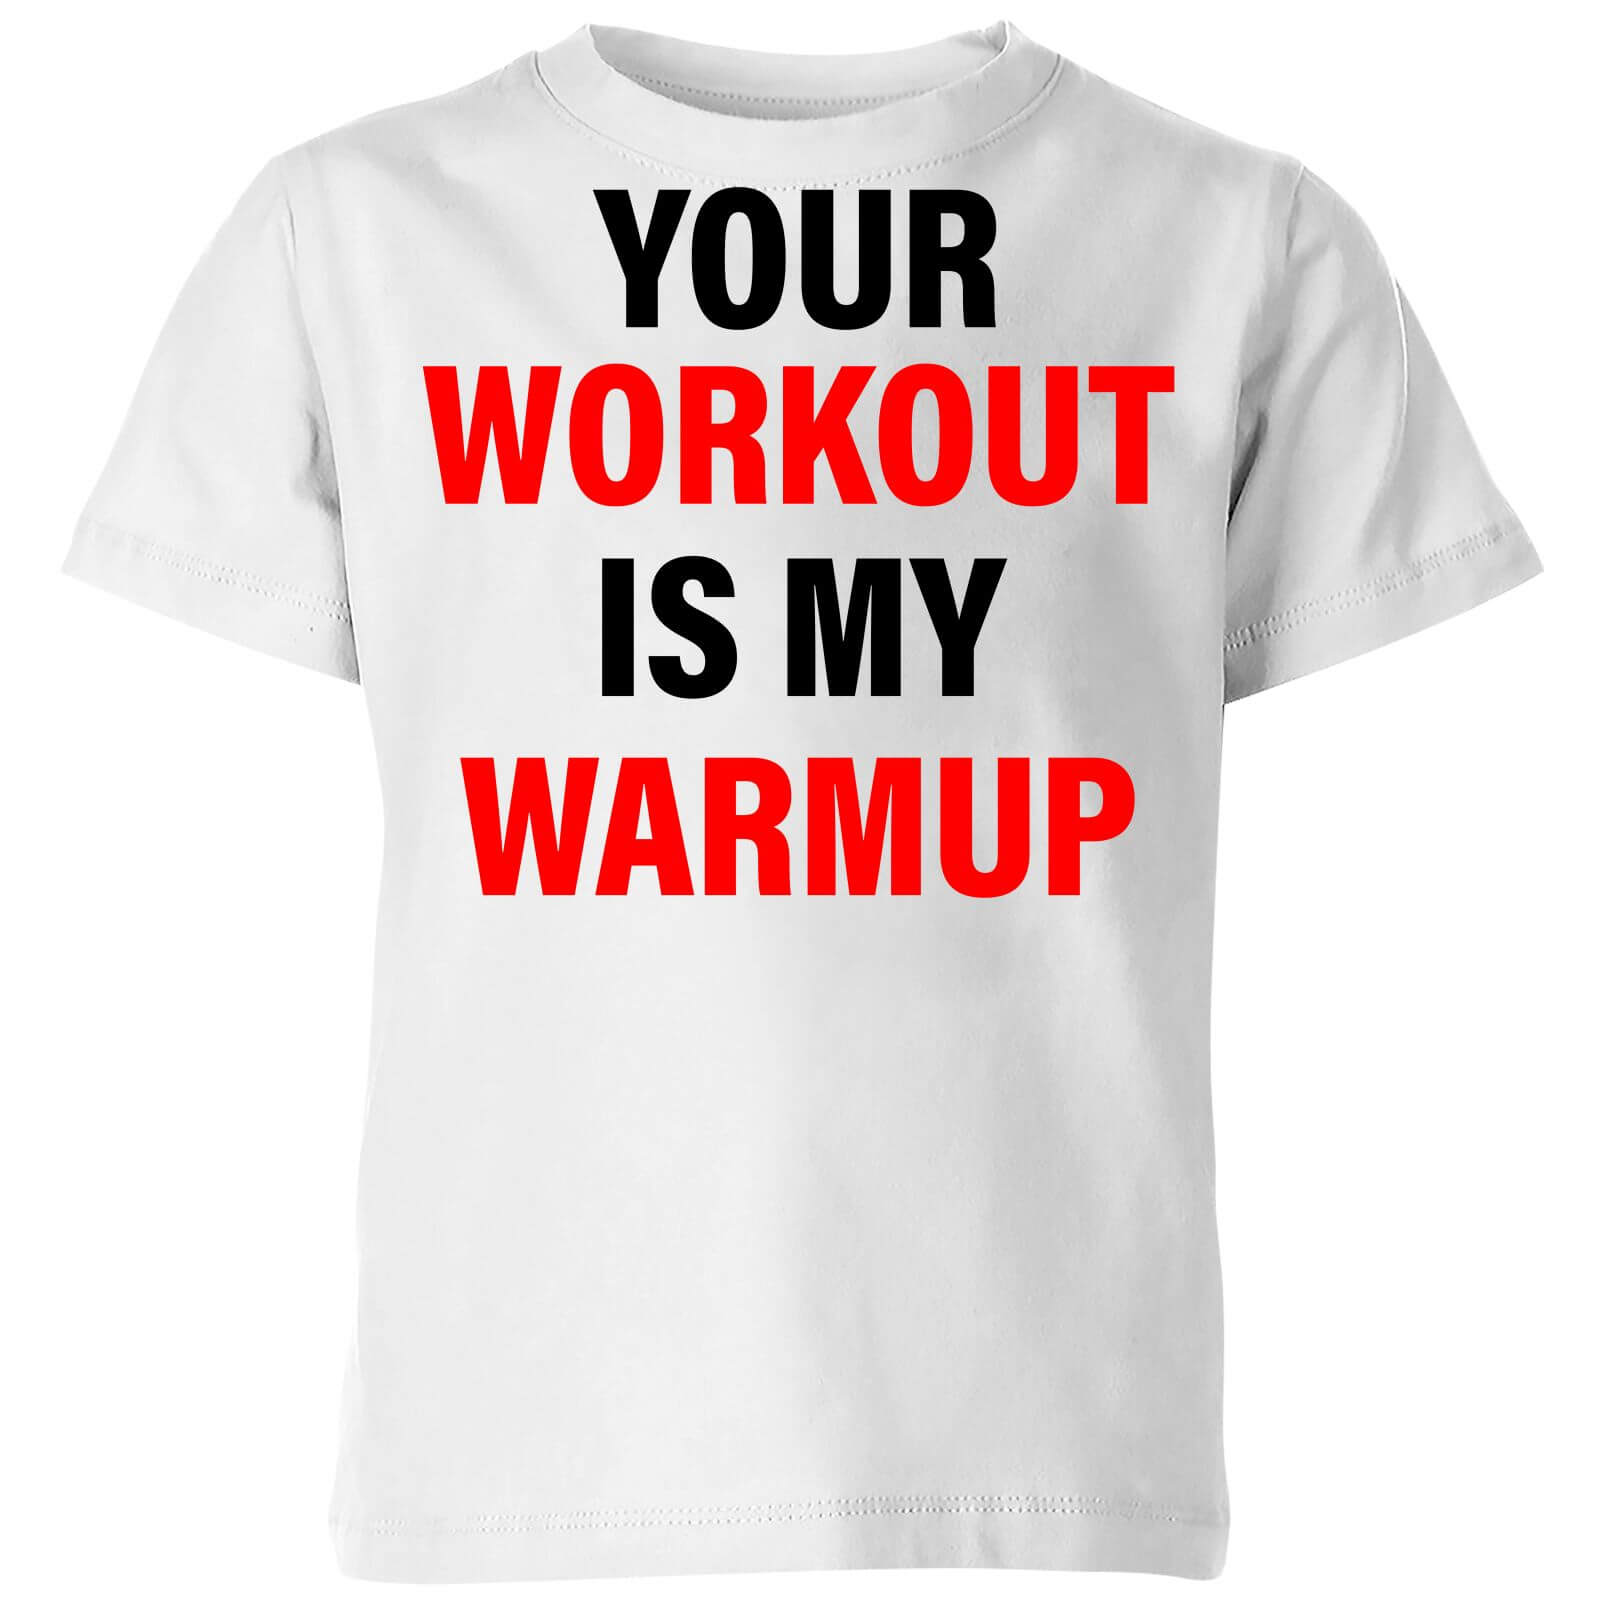 Your Workout is my Warmup Kids' T-Shirt - White - 3-4 Years - White